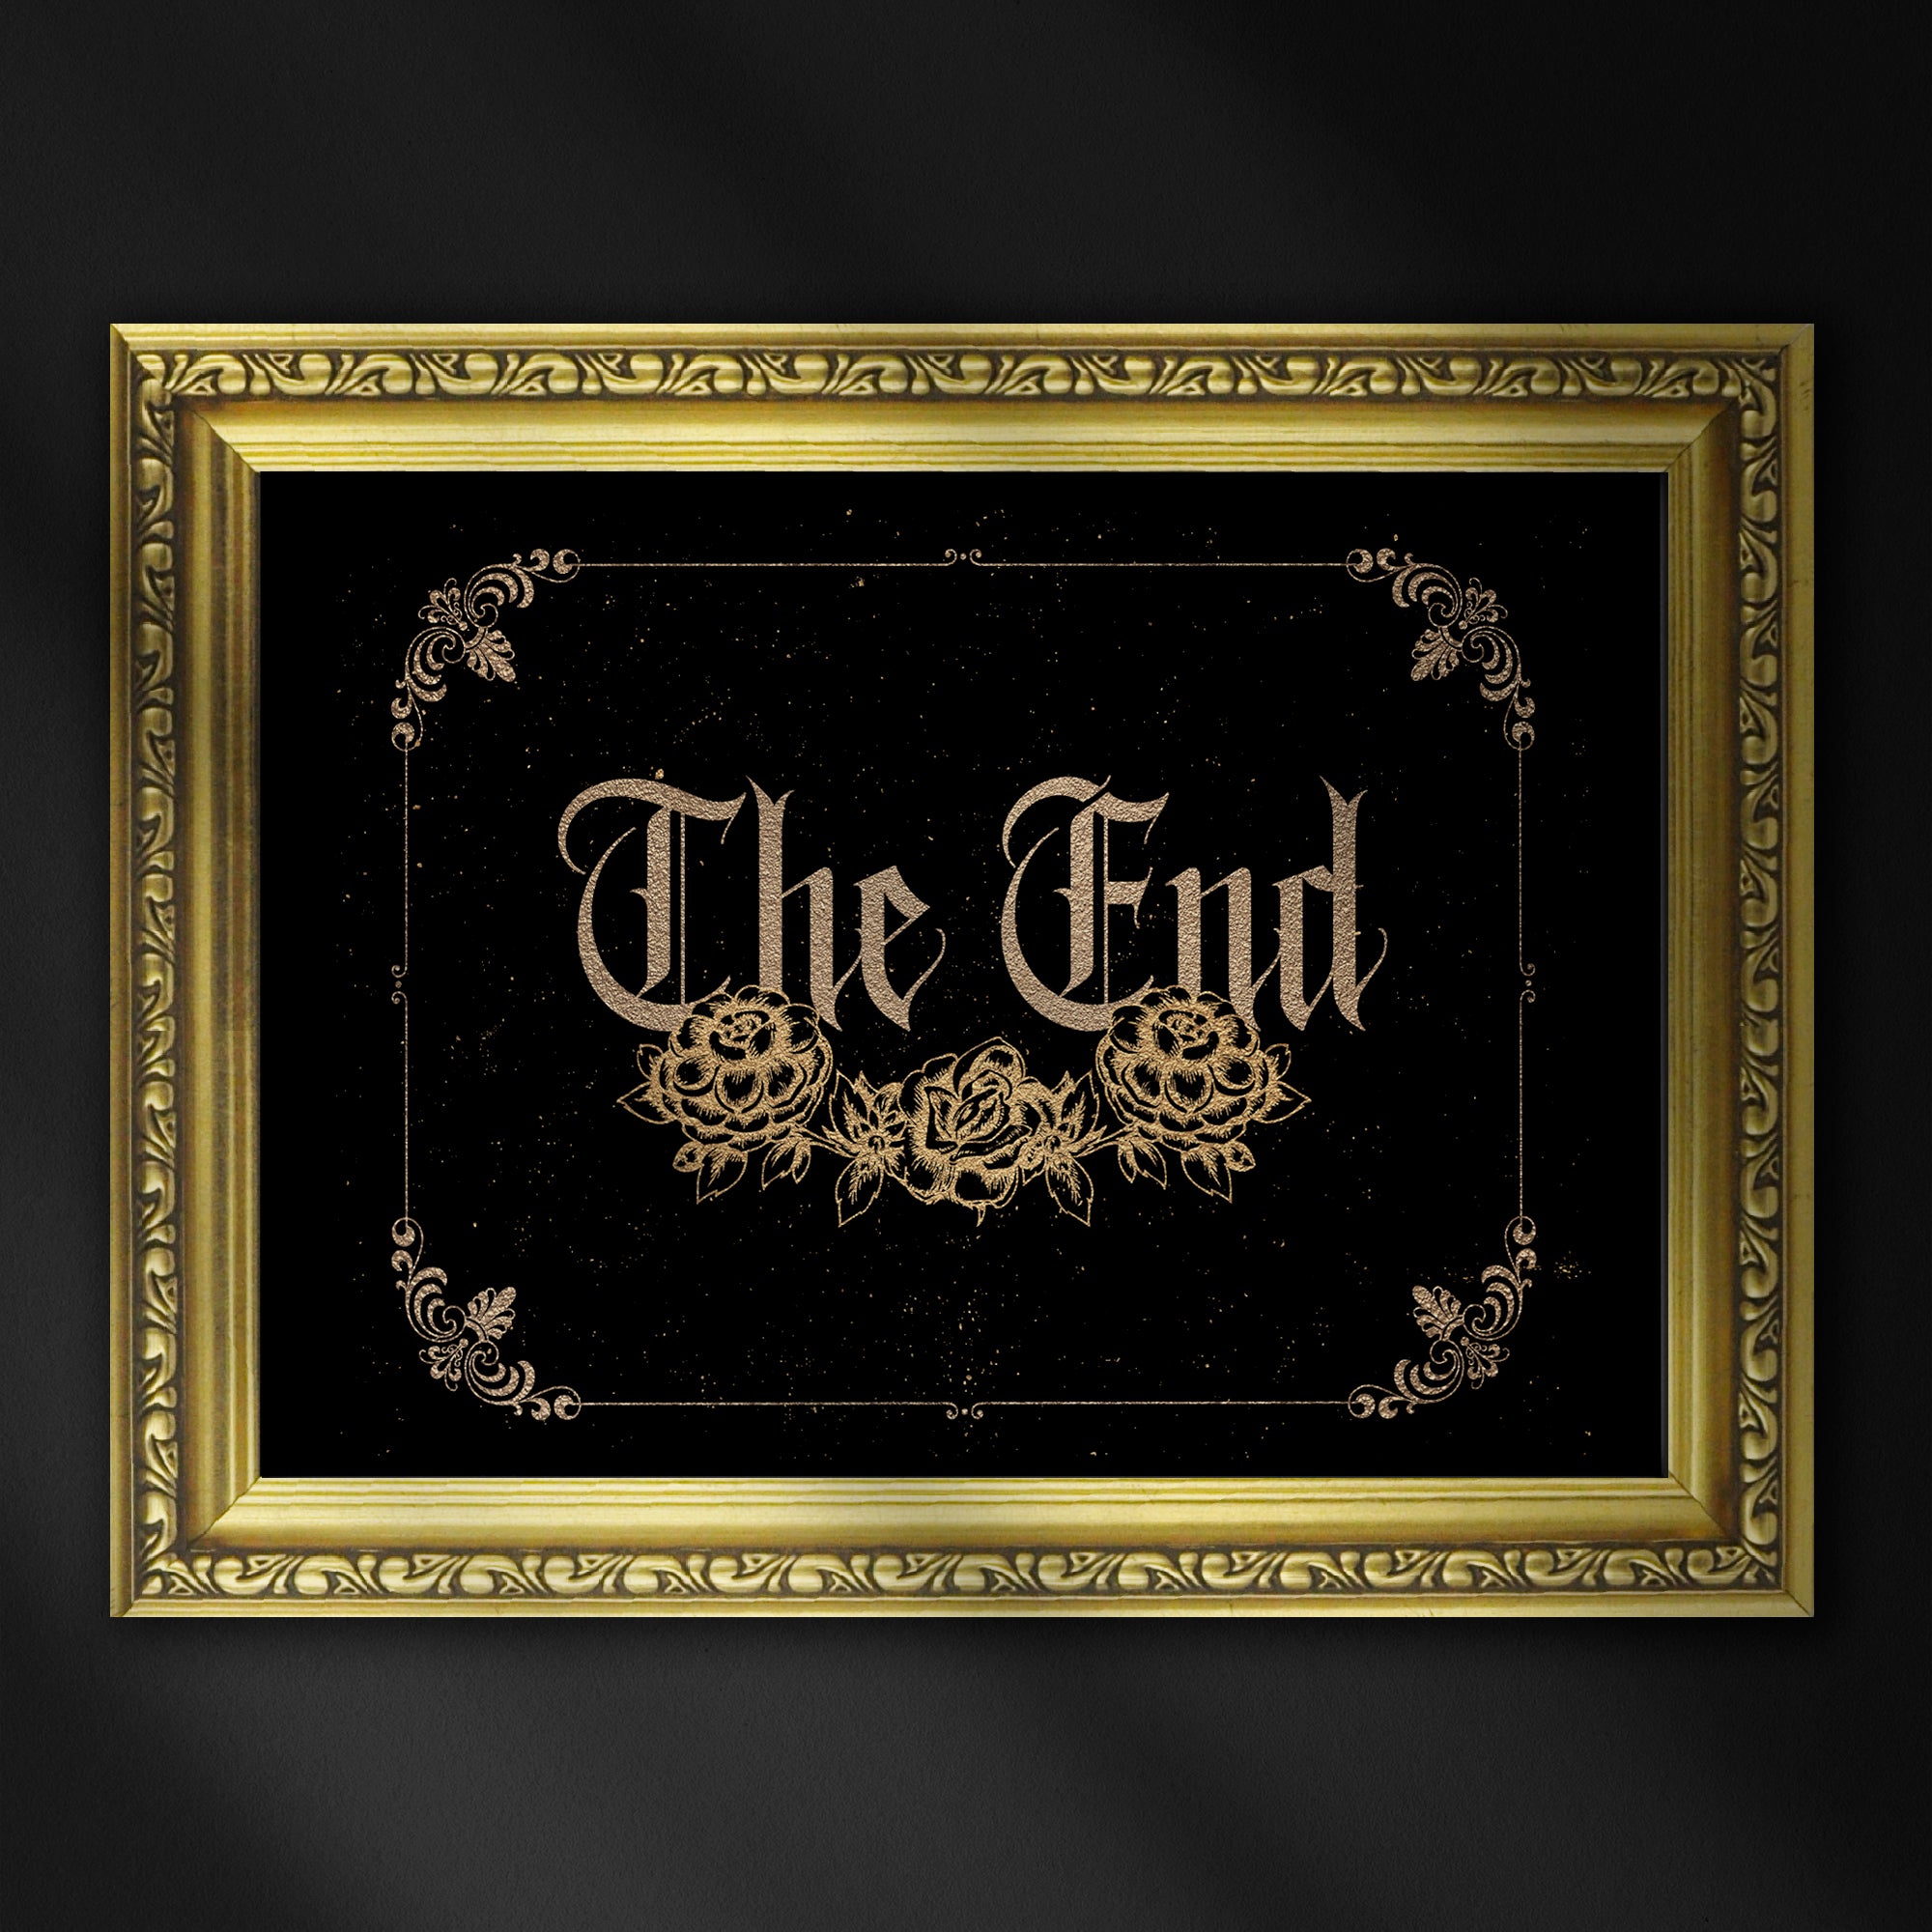 The End Print